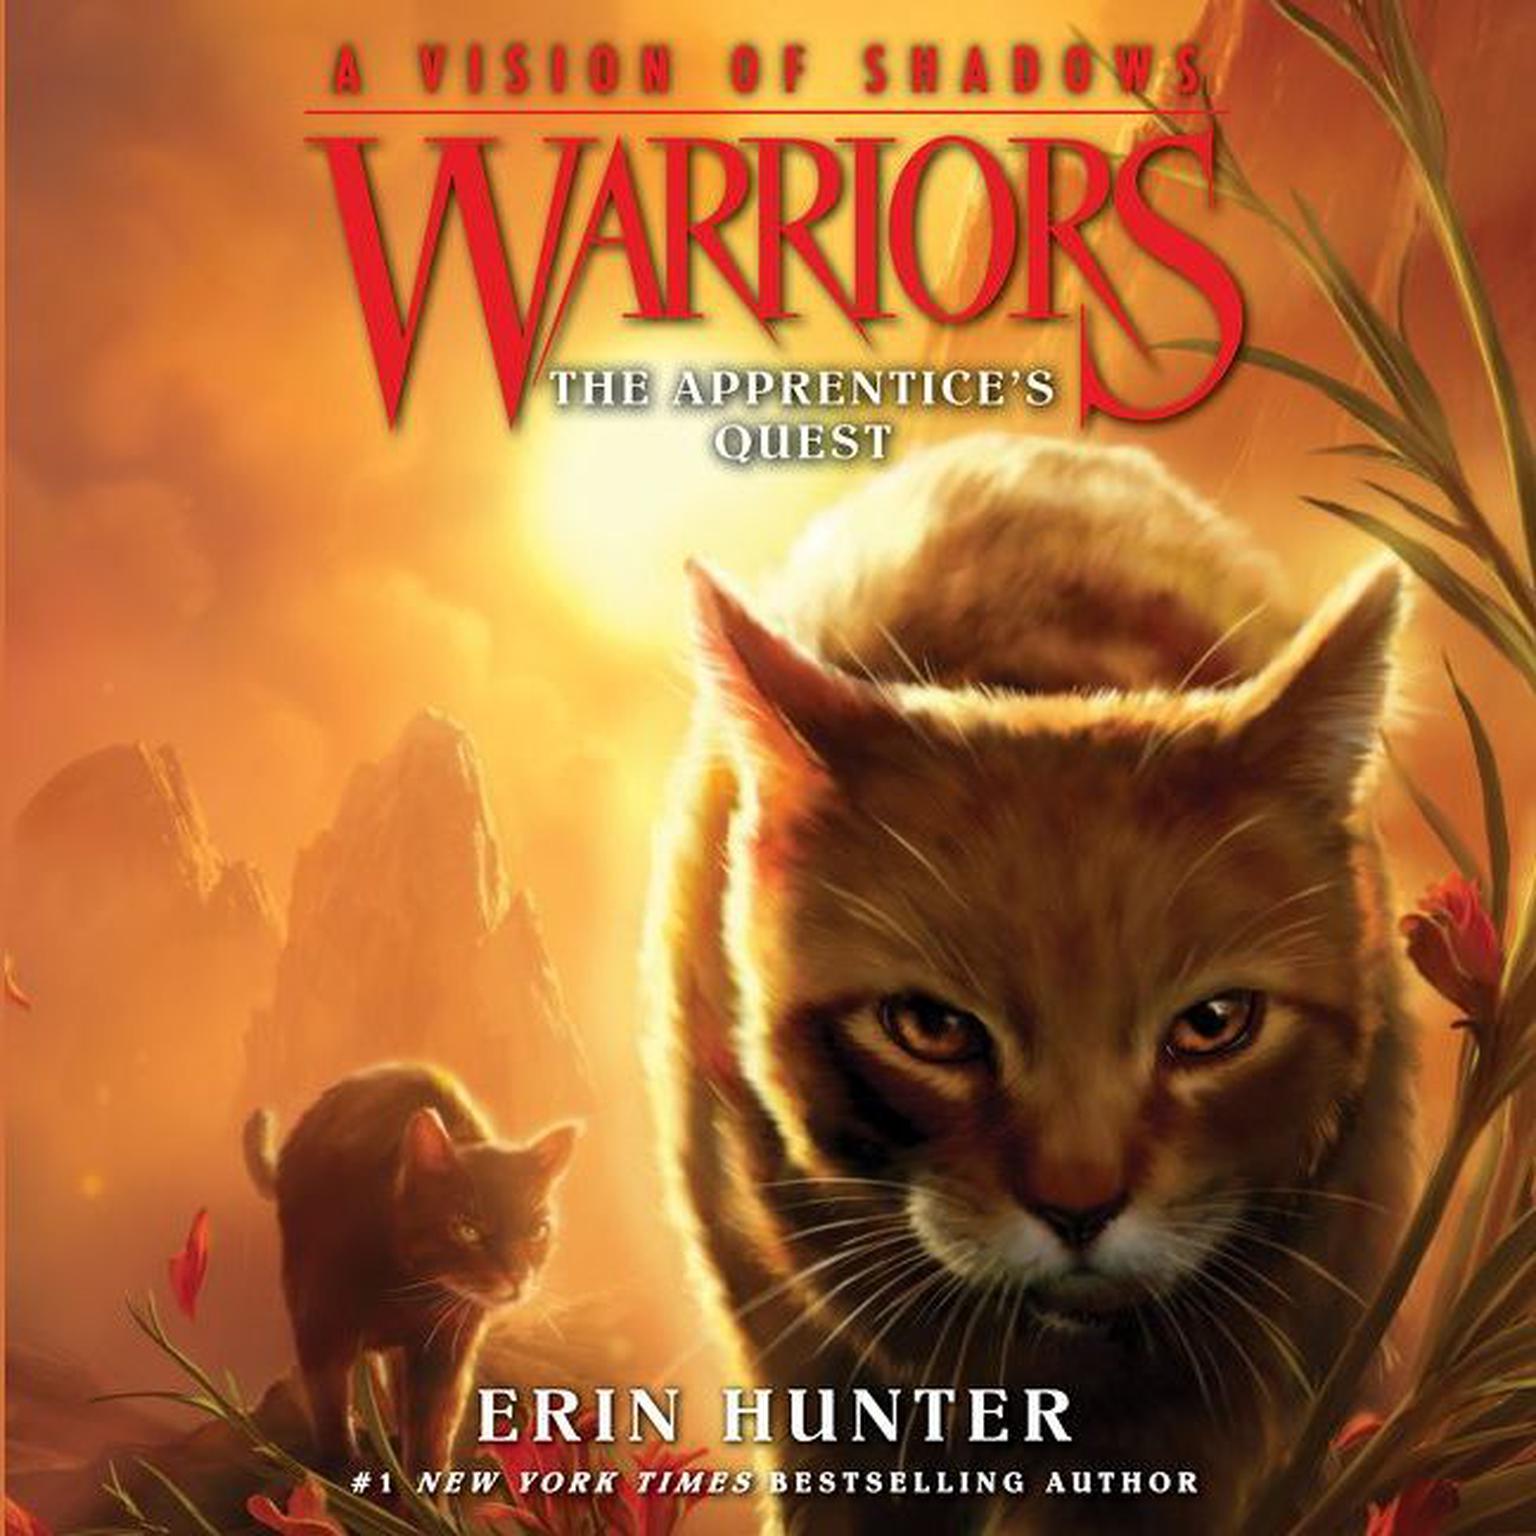 Warriors: A Vision of Shadows #1: The Apprentices Quest Audiobook, by Erin Hunter